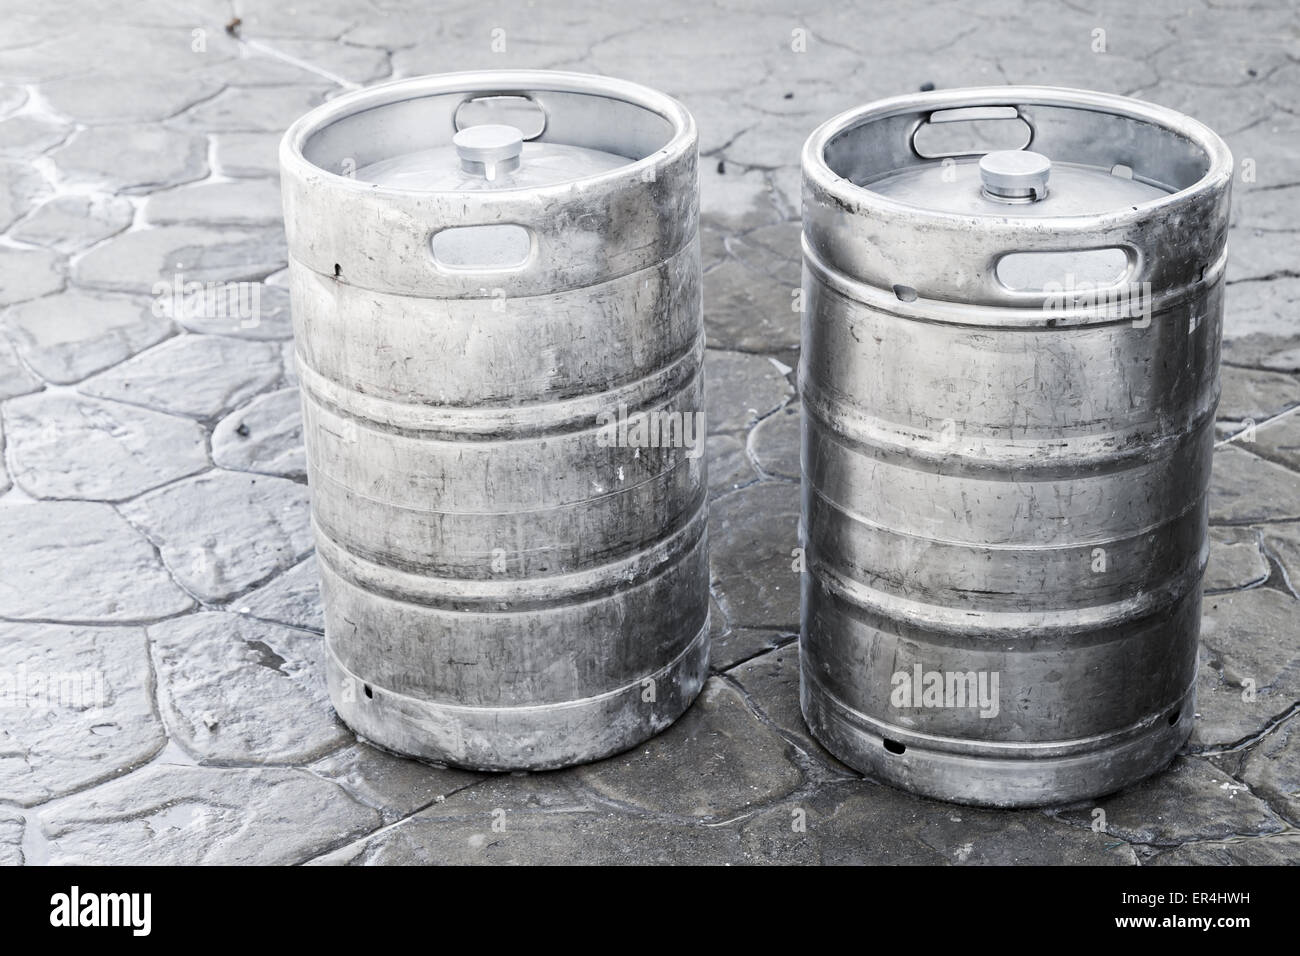 Used aluminum kegs, small barrels commonly used to store, transport, and serve beer Stock Photo